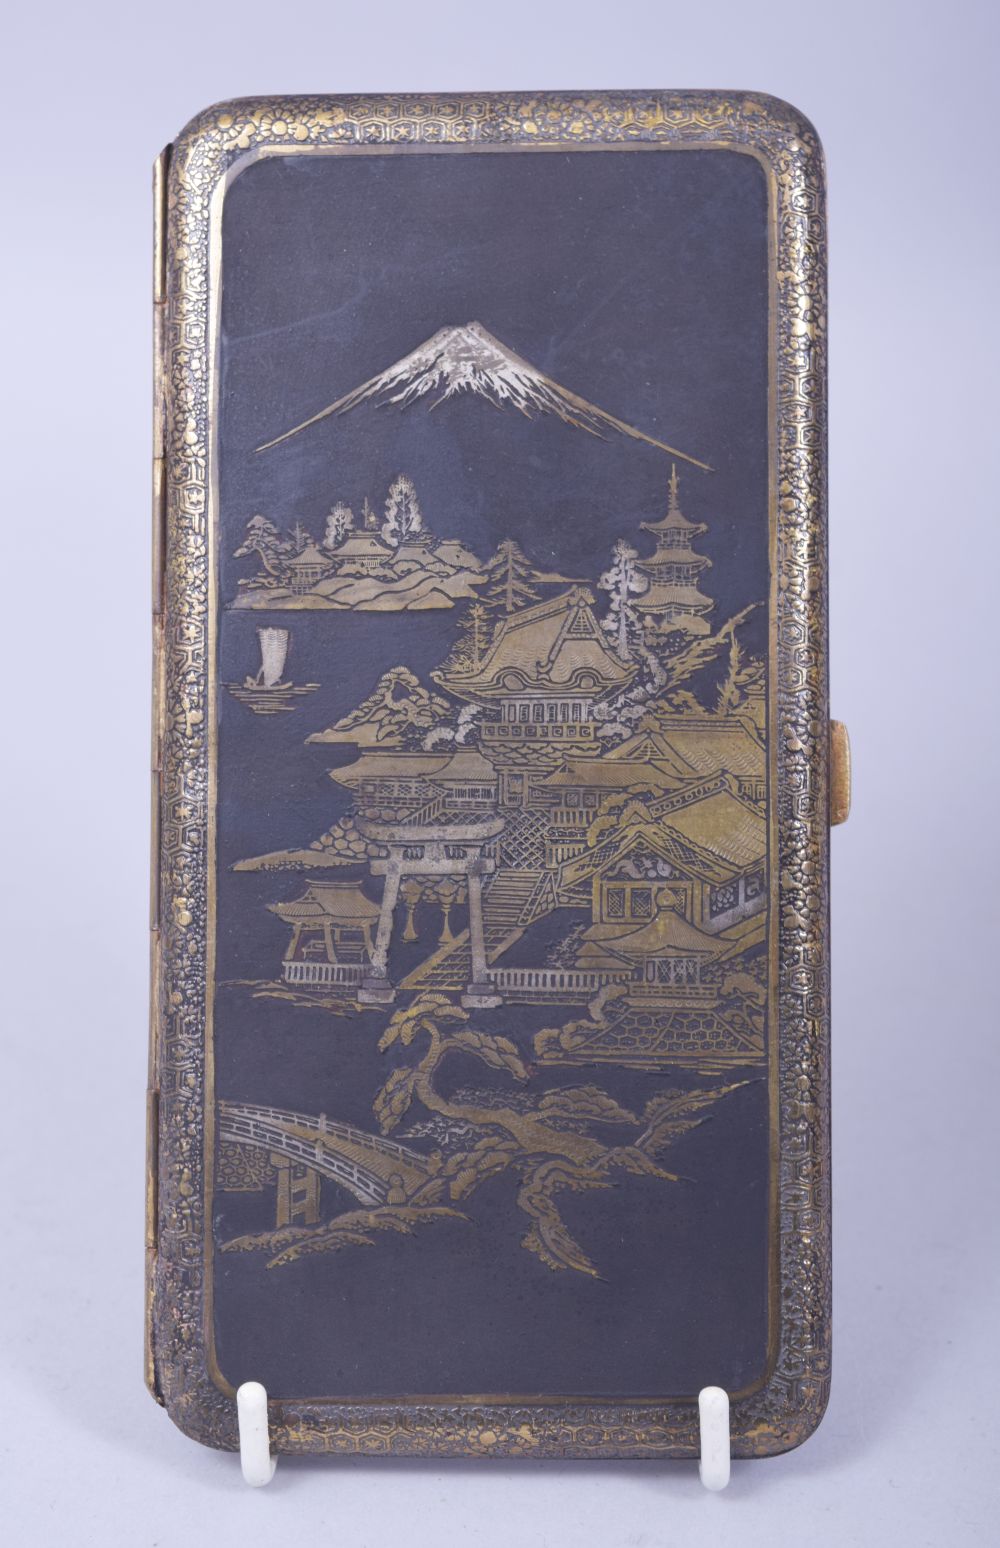 A JAPANESE DAMASCENED MIXED METAL CIGARETTE CASE, with a panel depicting buildings with mount fuji